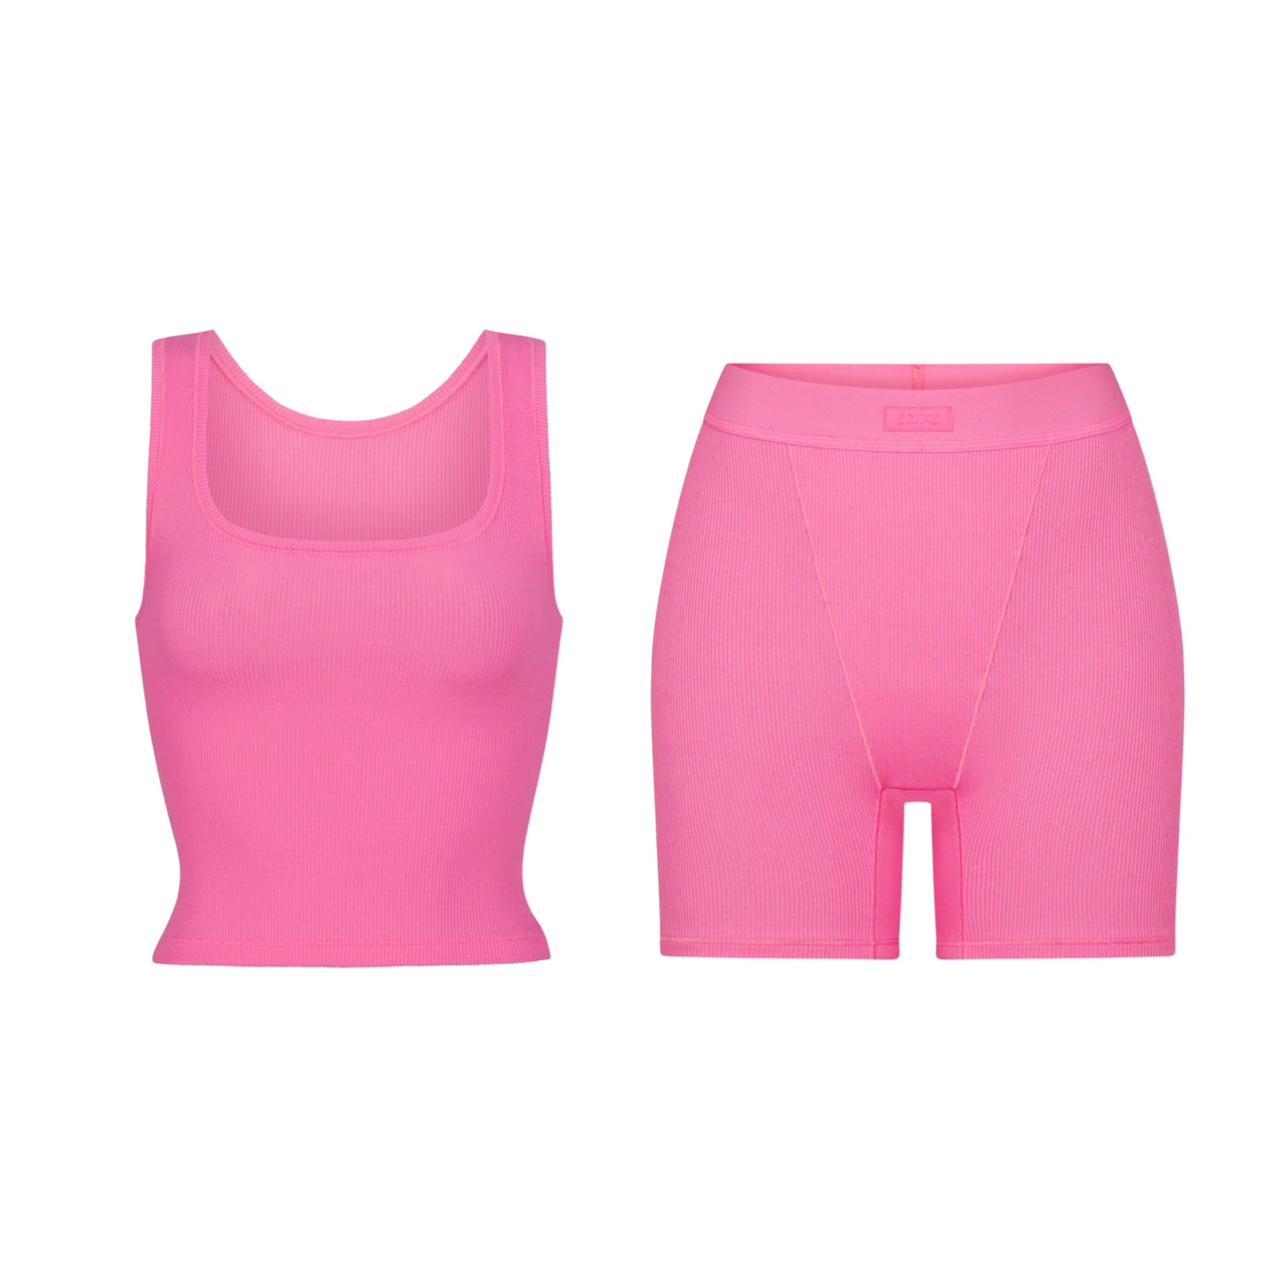 SKIMS Cotton Jersey T-Shirt in Pink & Cotton Rib Boxer Set in Sugar Pink,  SMALL